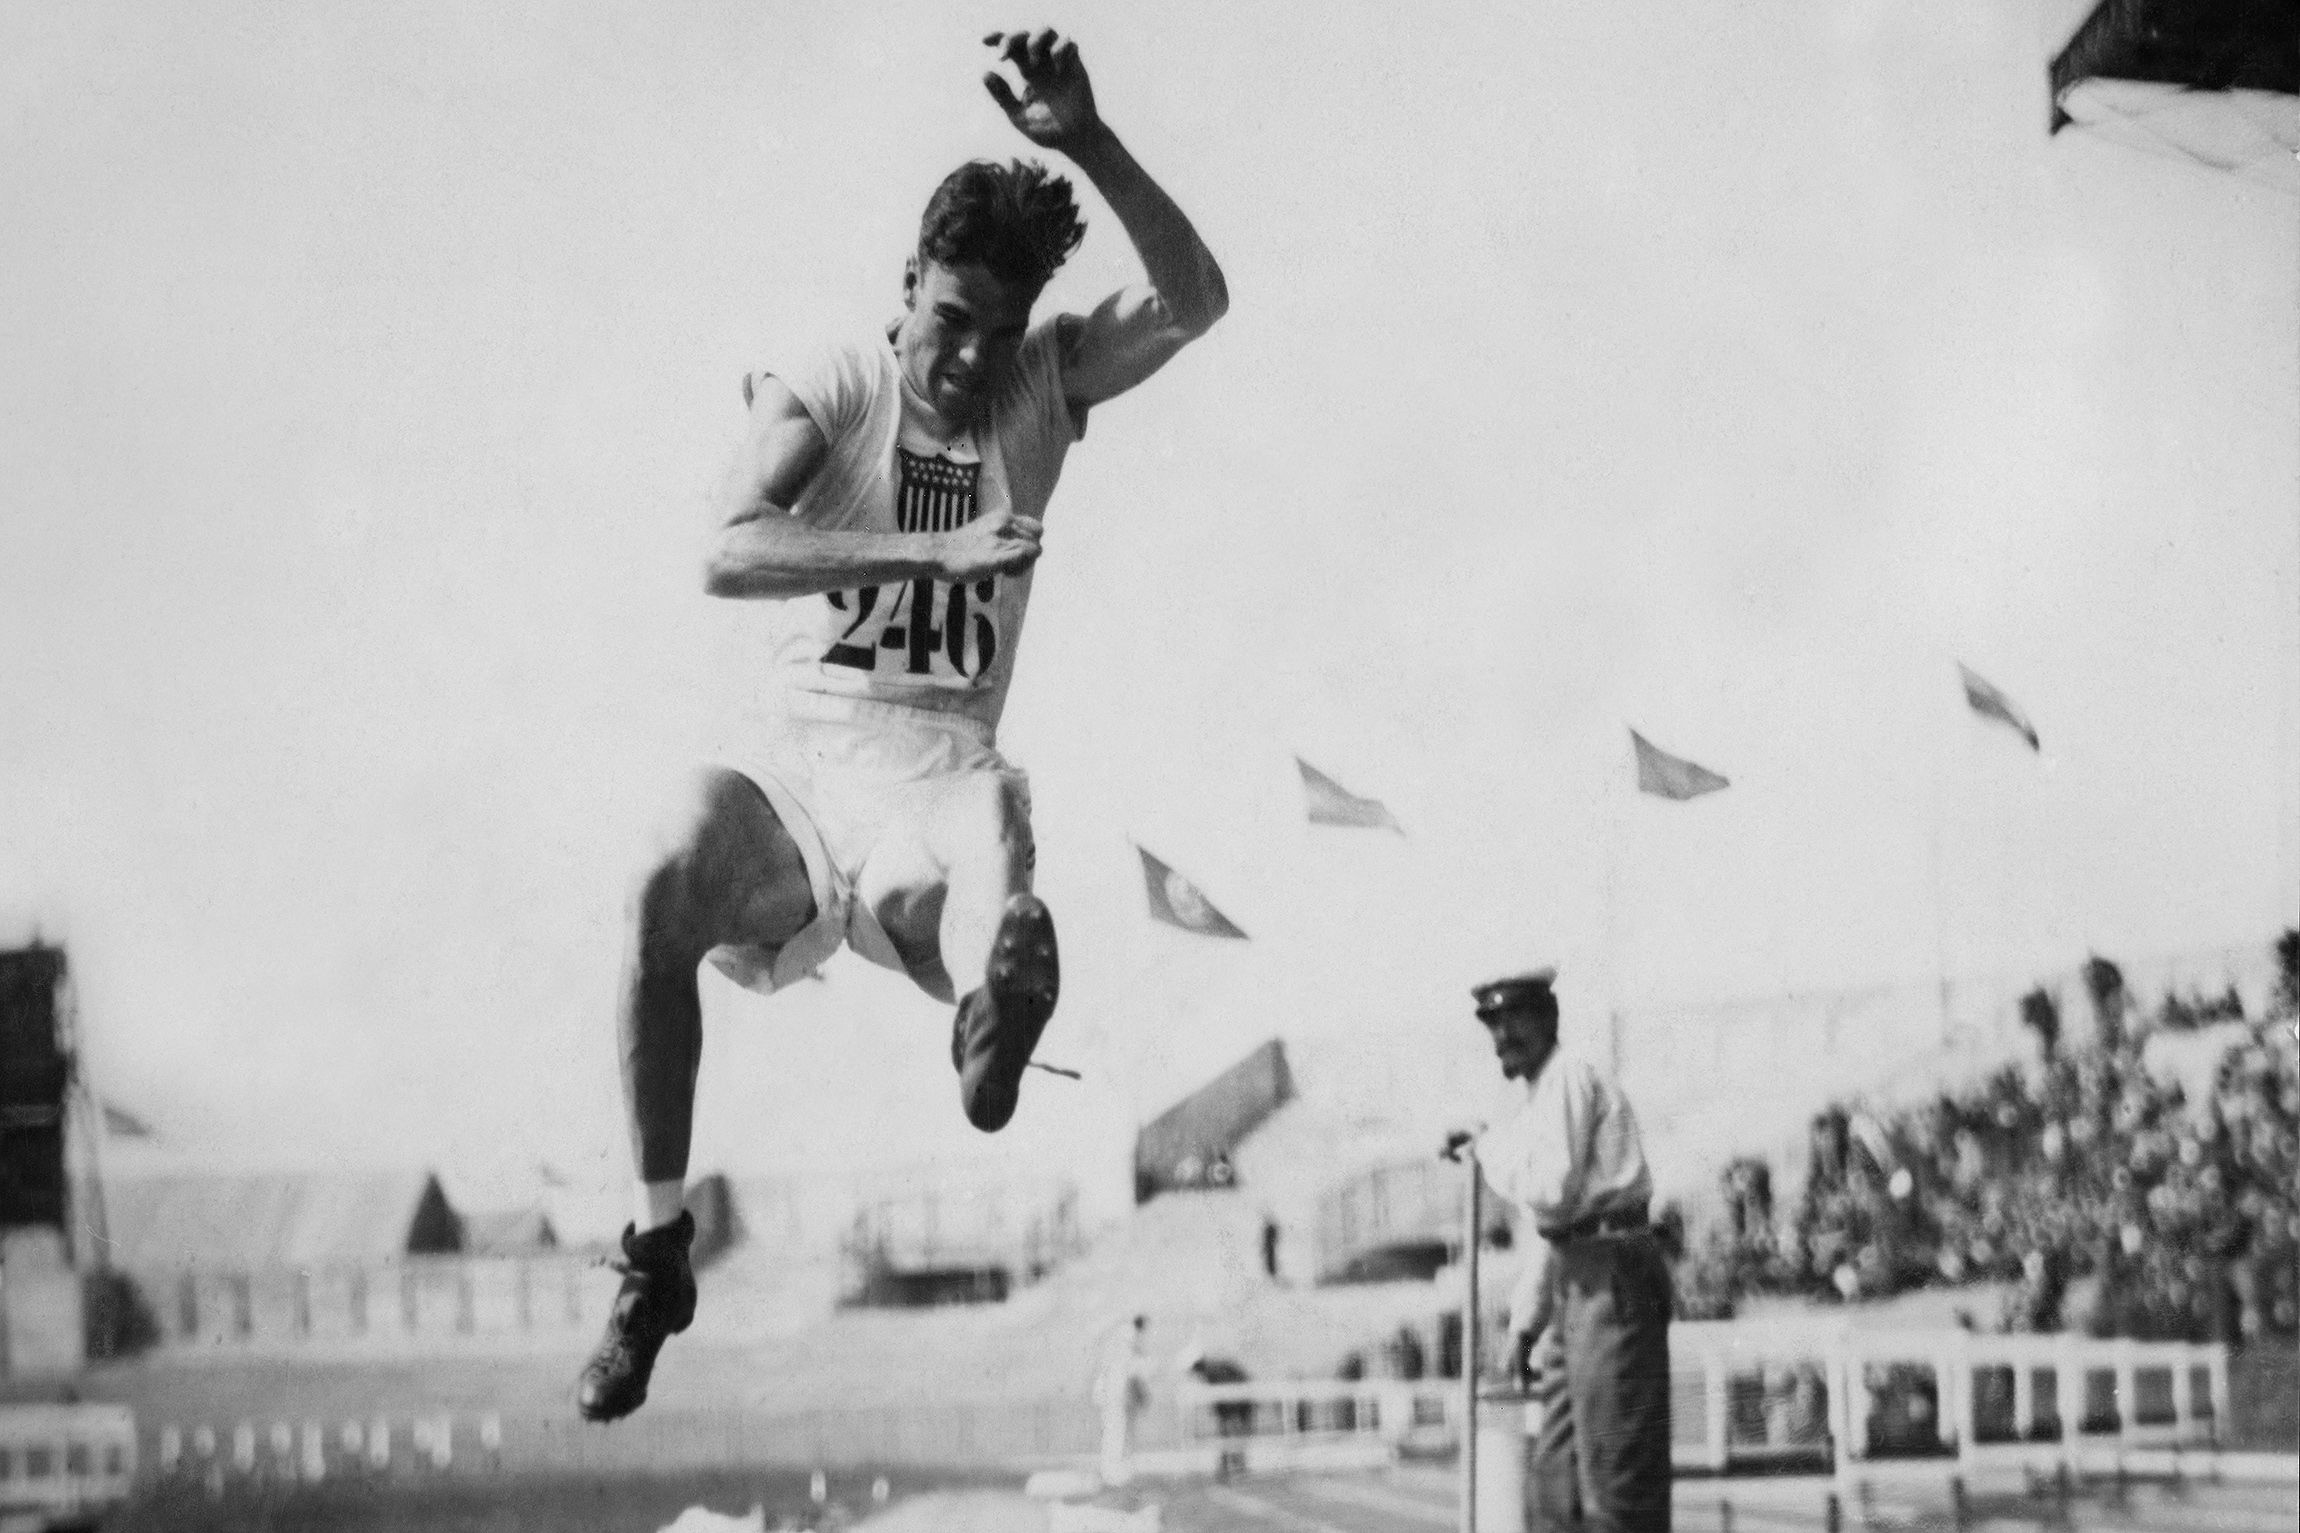 Robert LeGendre sets a long jump record within the pentathlon at the 1924 Olympics